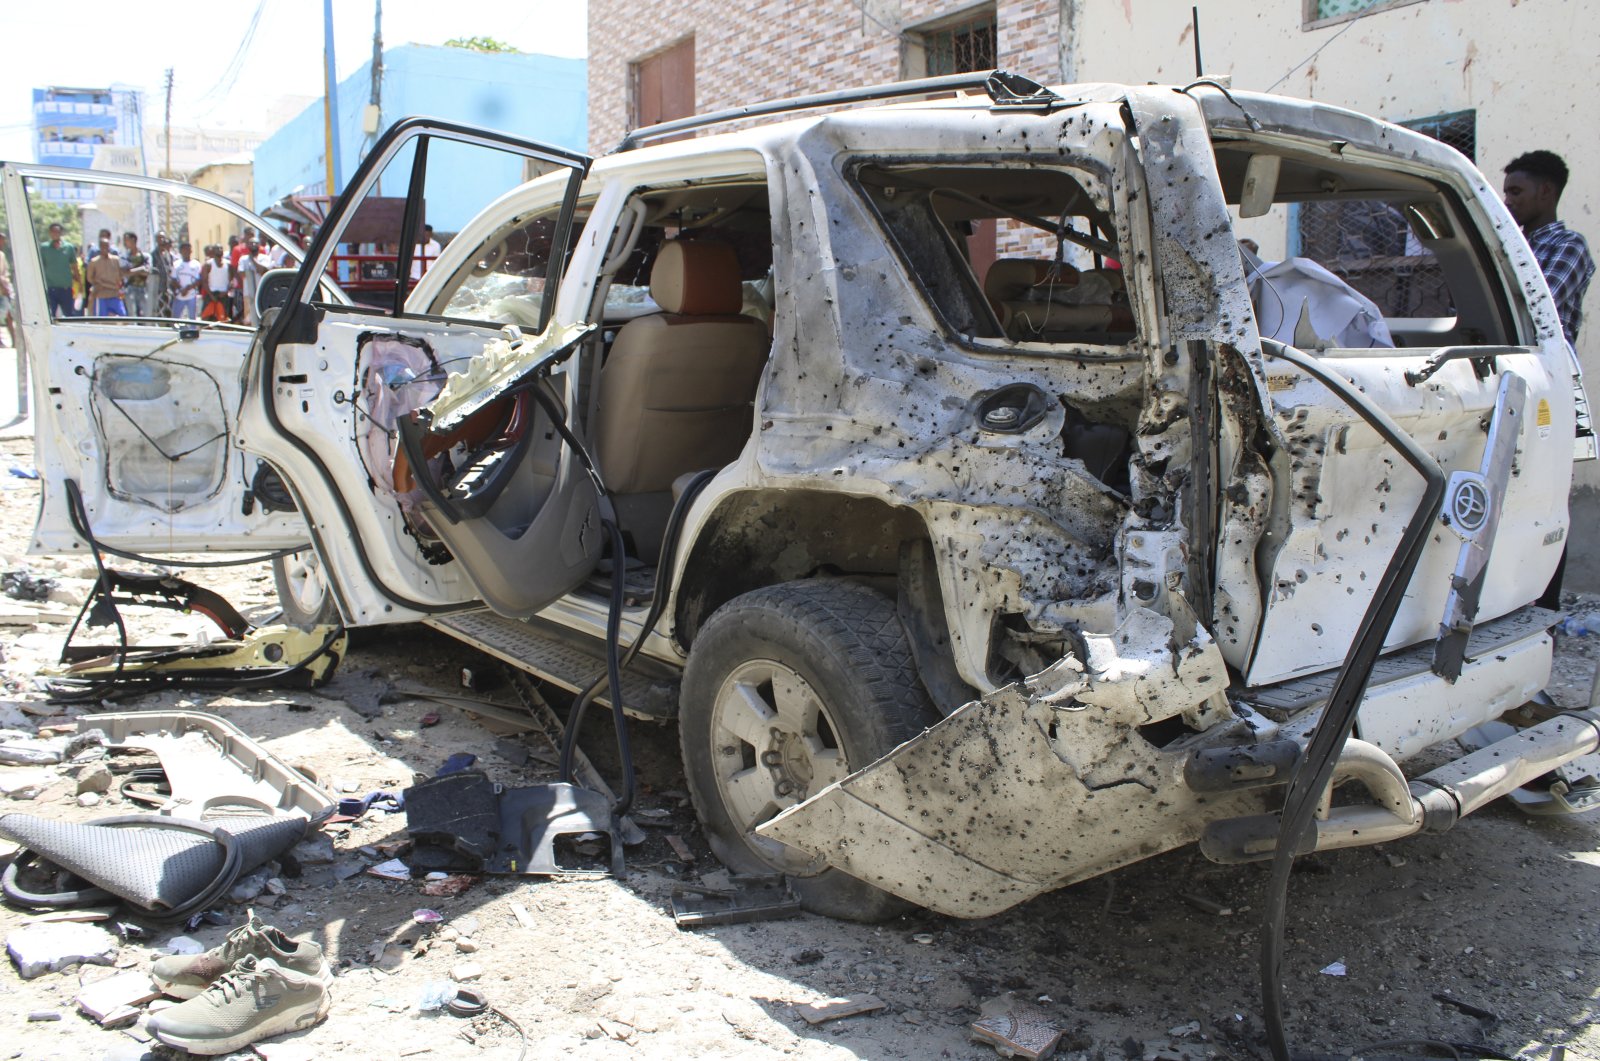 A destroyed car pictured in the aftermath of an explosion on a road in the capital caused by a suicide bomber targeting Somalia’s government spokesperson Mohamed Ibrahim Moalimuu in Mogadishu, Somalia, Jan. 16, 2022. (EPA Photo)